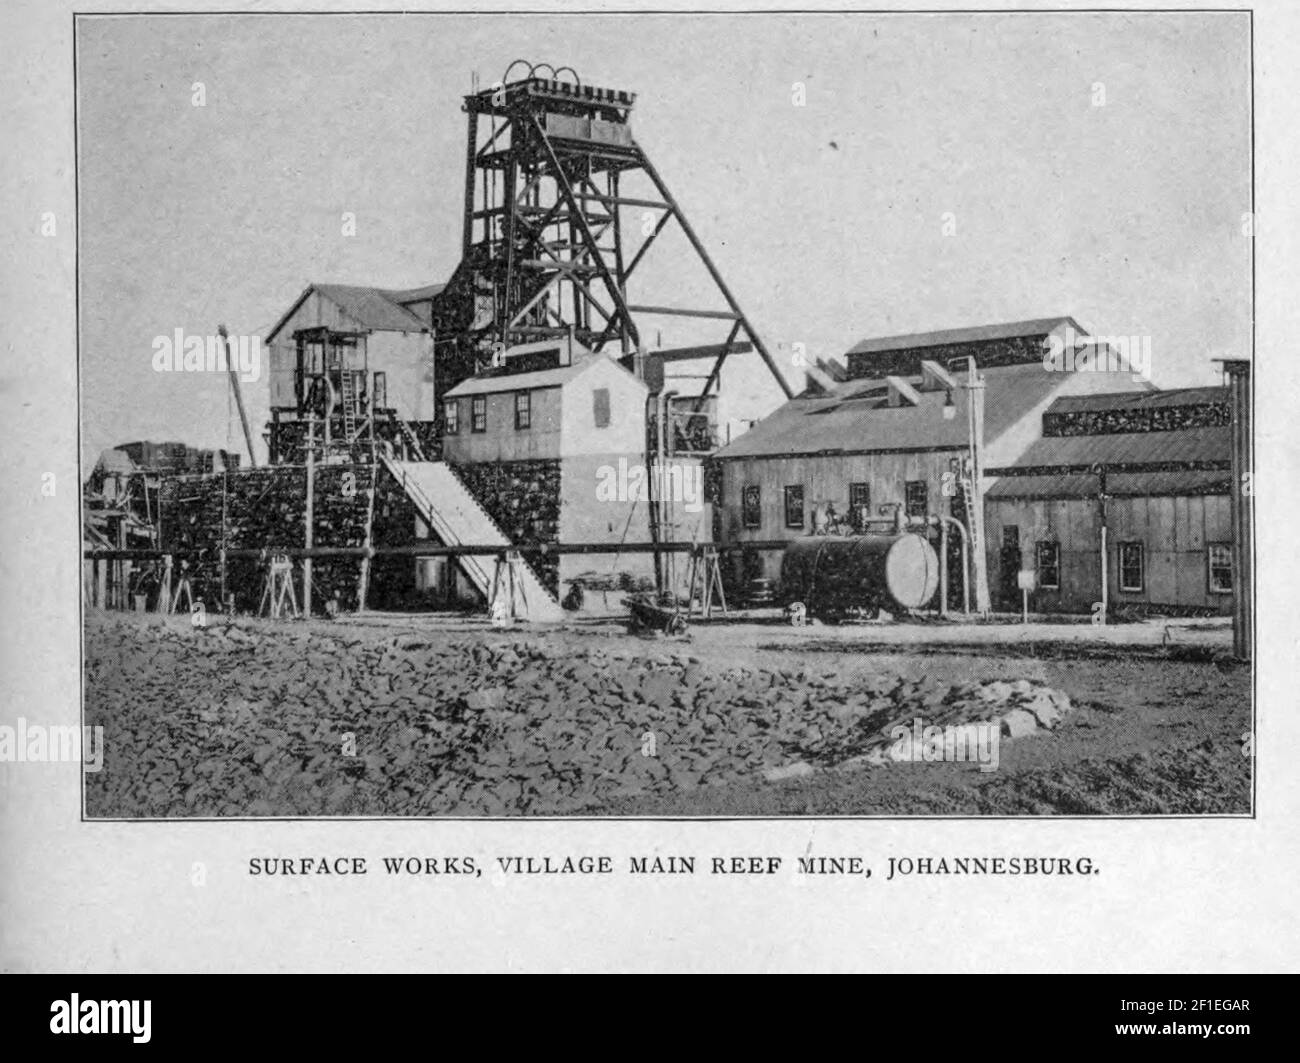 Surface Works, Village Main Reef Mine, Johannesburg from the book ' Boer and Britisher in South Africa; a history of the Boer-British war and the wars for United South Africa, together with biographies of the great men who made the history of South Africa ' By Neville, John Ormond Published by Thompson & Thomas, Chicago, USA in 1900 Stock Photo